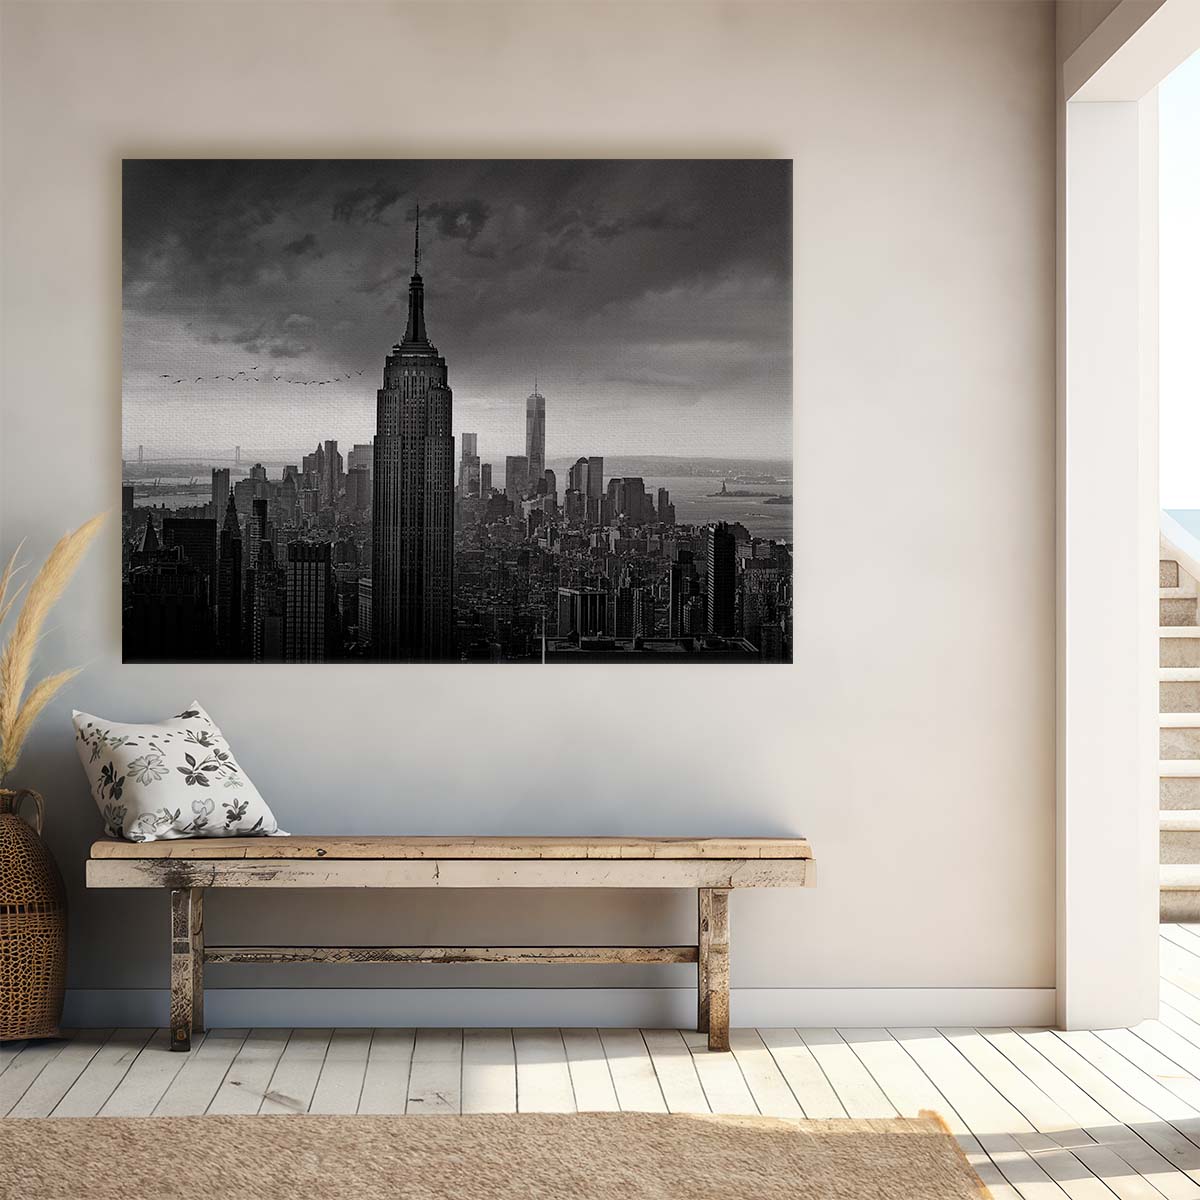 Iconic New York Cityscape Monochrome Skyline Wall Art by Luxuriance Designs. Made in USA.